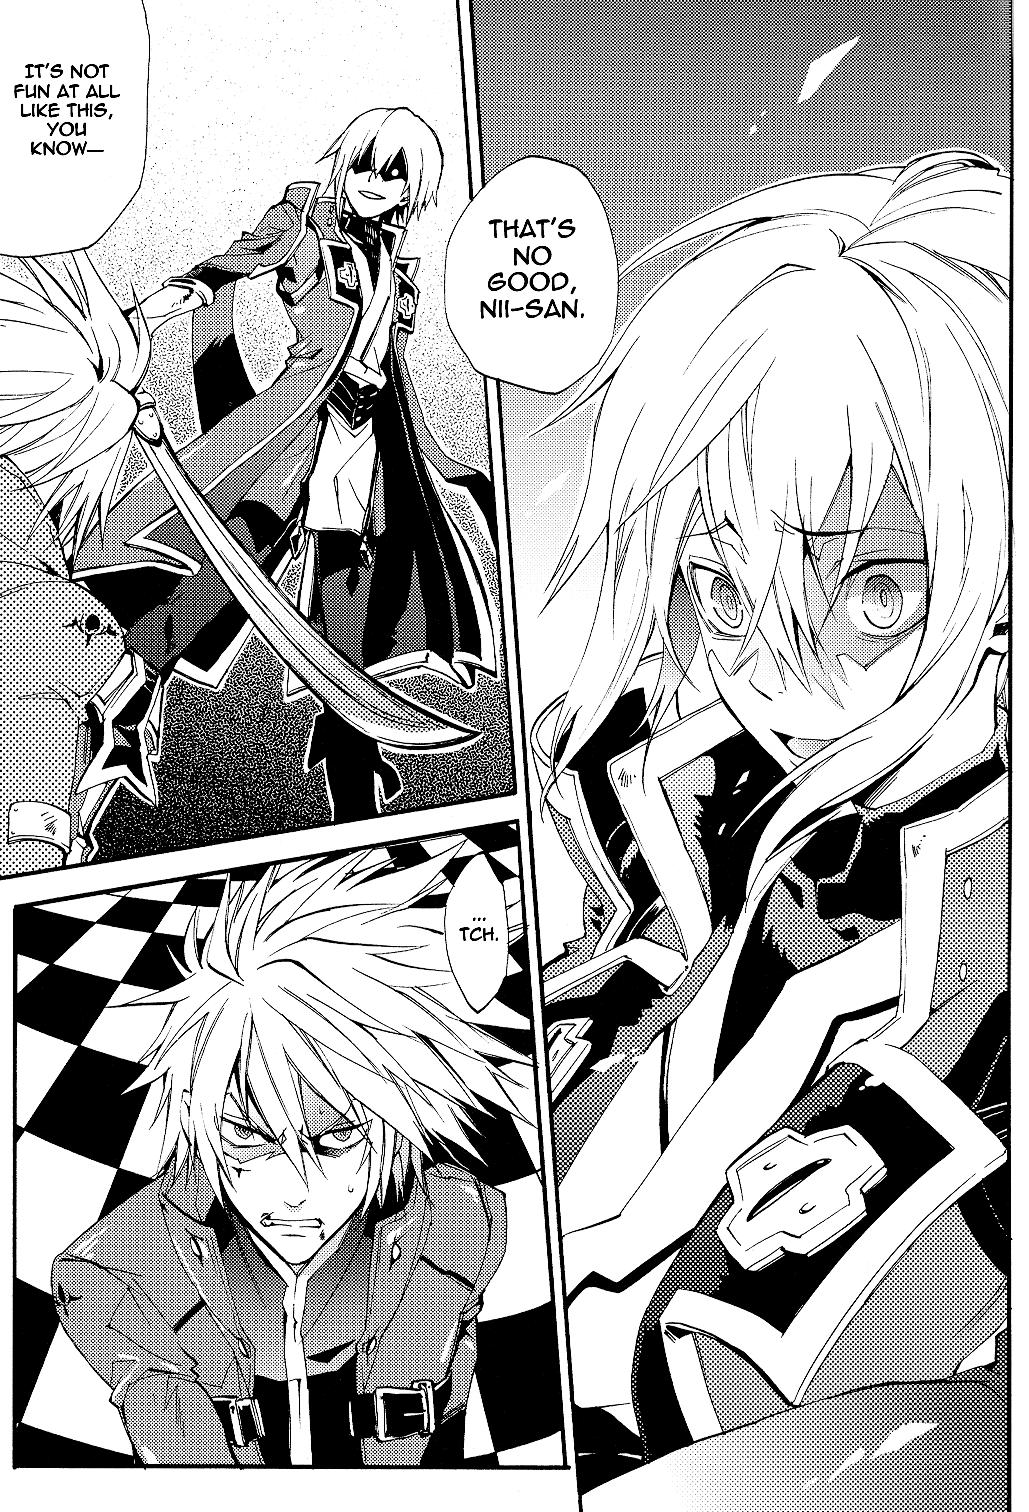 Fingering Ore no Yandere Otouto ga Konna ni Kawaii Wake ga Nai | My Yandere Little Brother Can’t Be This Cute - Blazblue Eating Pussy - Page 3